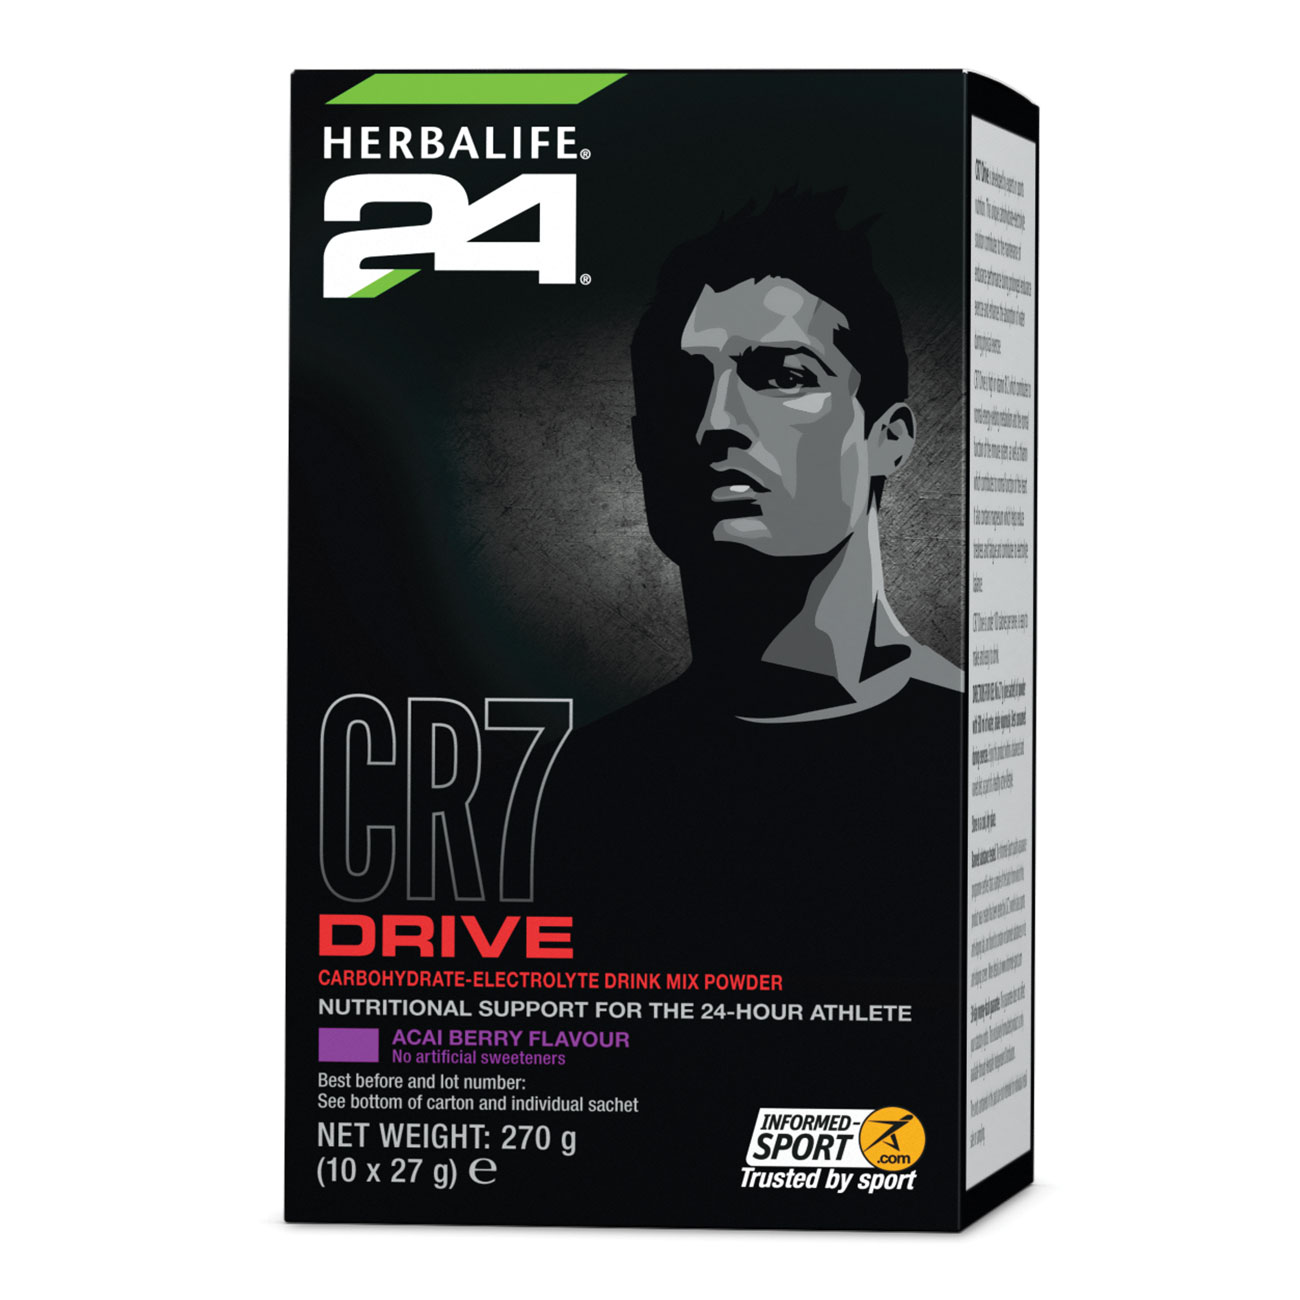 Herbalife24® CR7 Drive Sports Drink Acai Berry product shot